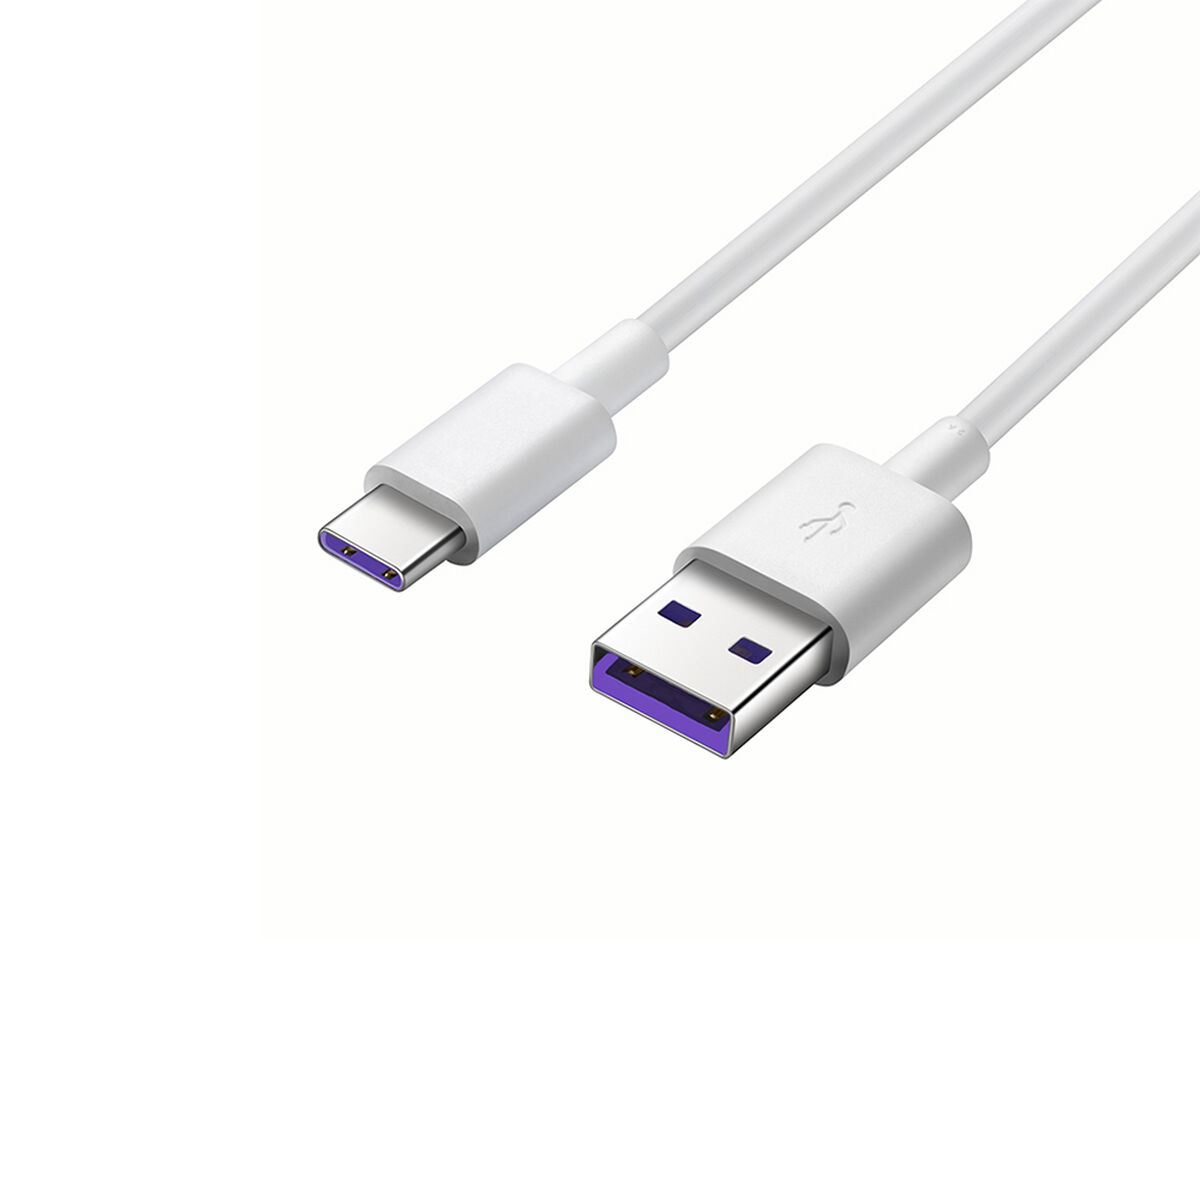 Cable Micro USB Huawei CP71 SuperCharge 1 Metro